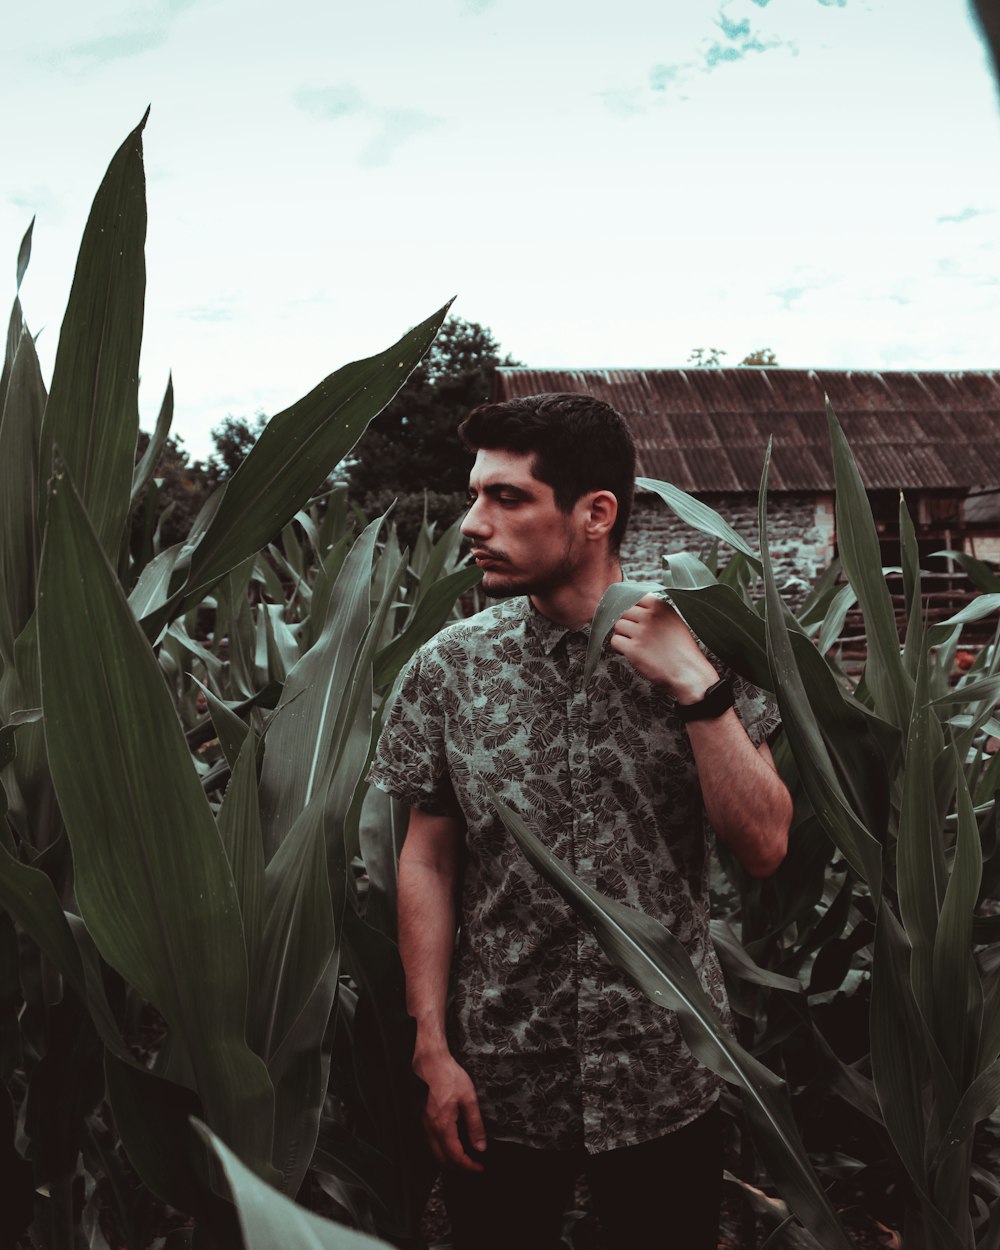 a man standing in a field of corn